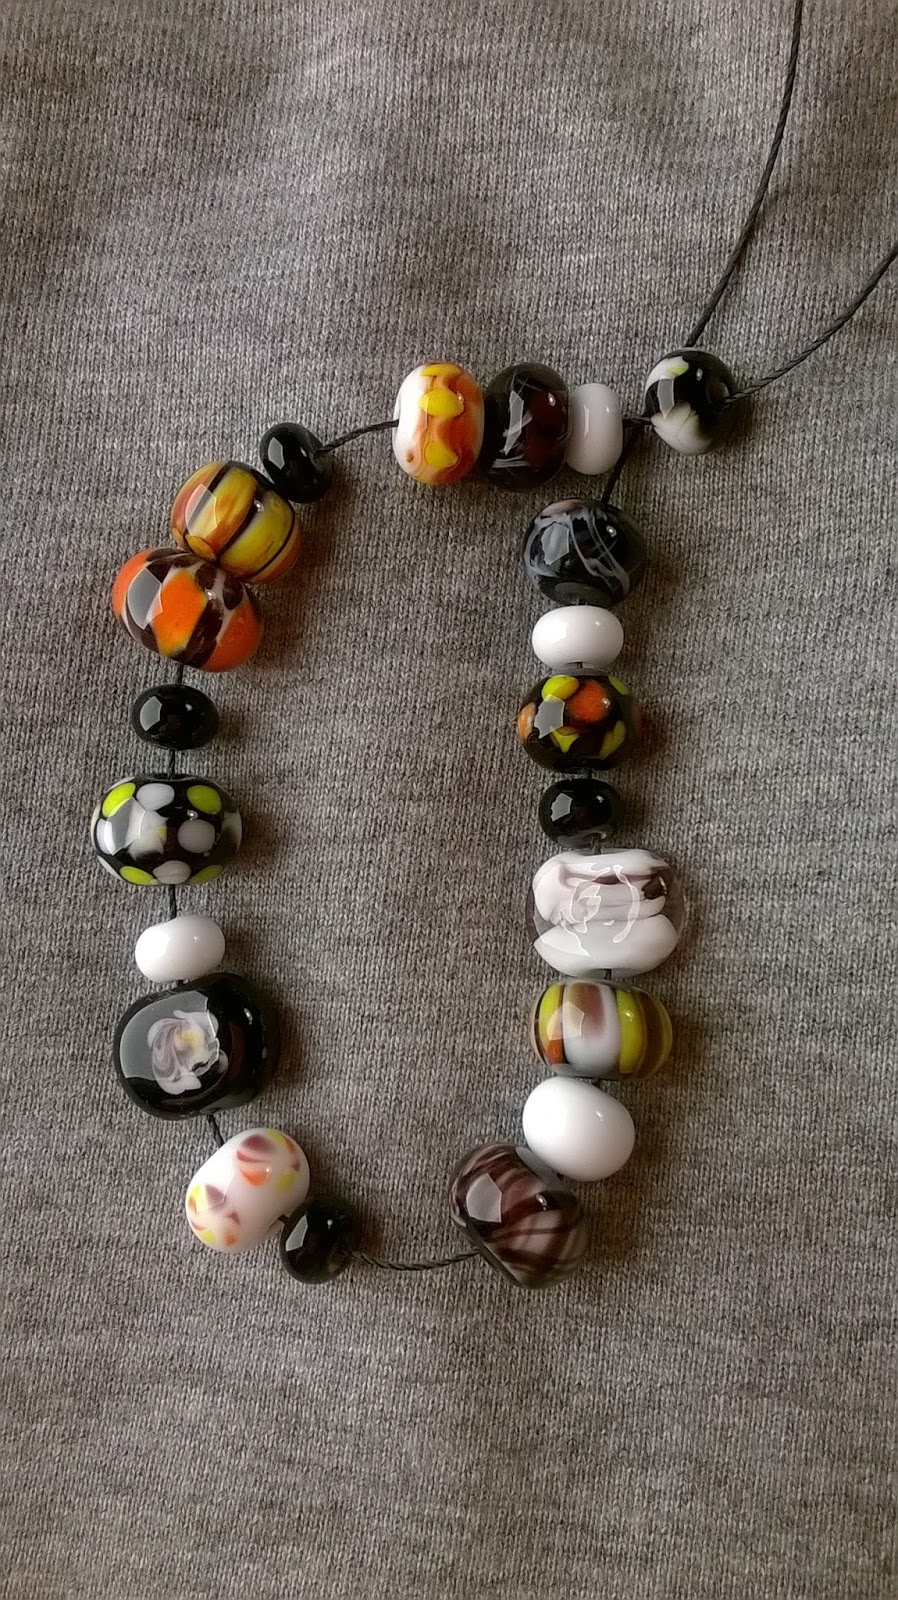 Vestheria-Beads: Lampwork beads with a two gas torch